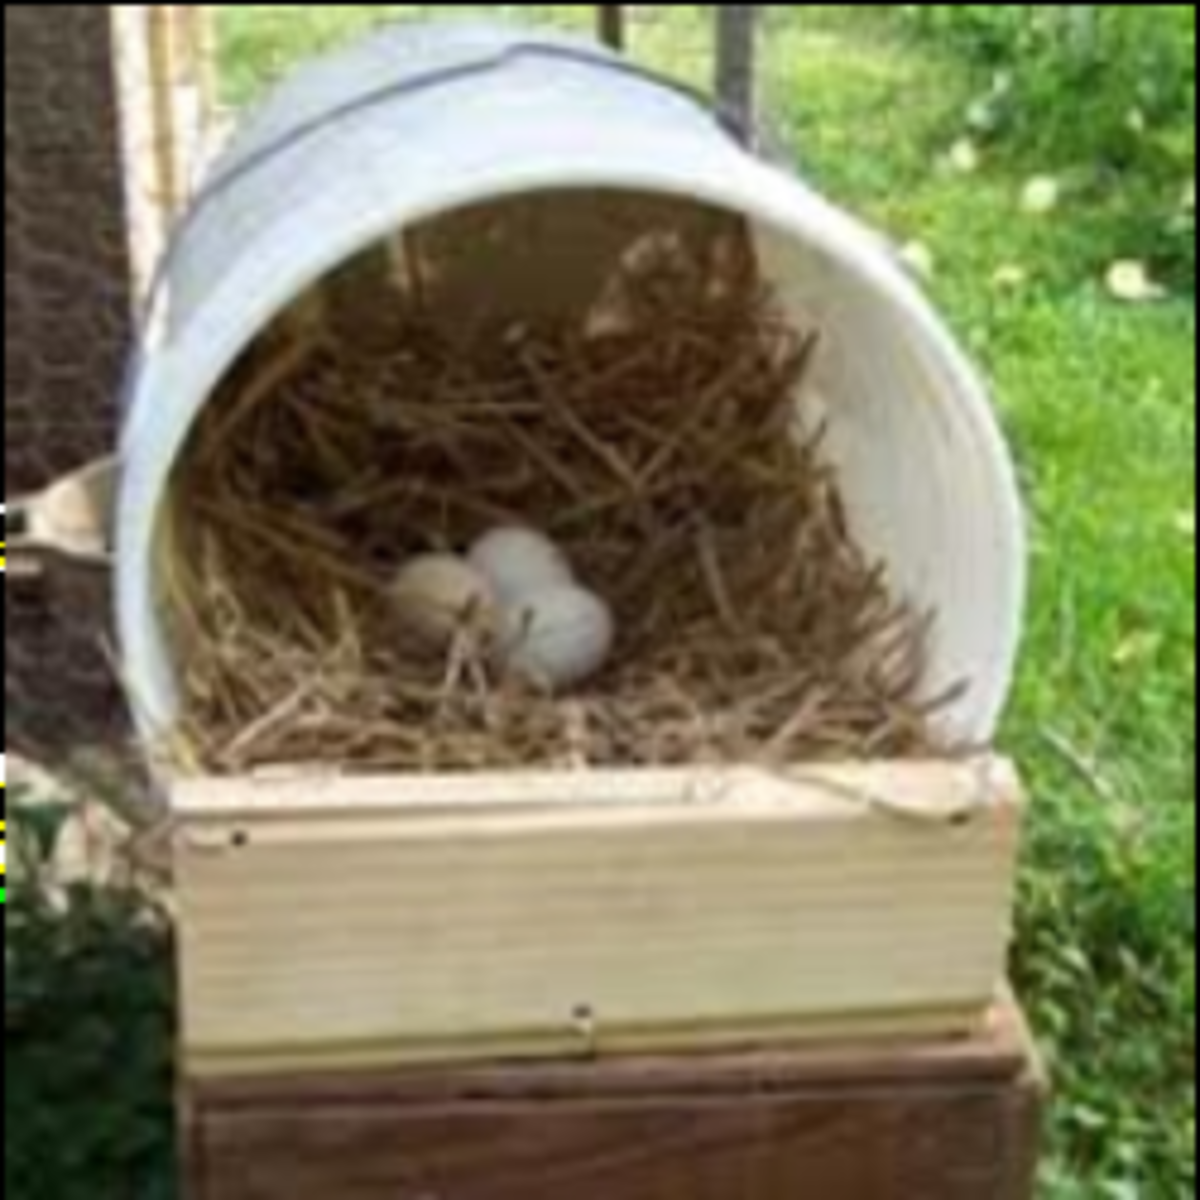 Nesting box made from a plastic utility bucket.